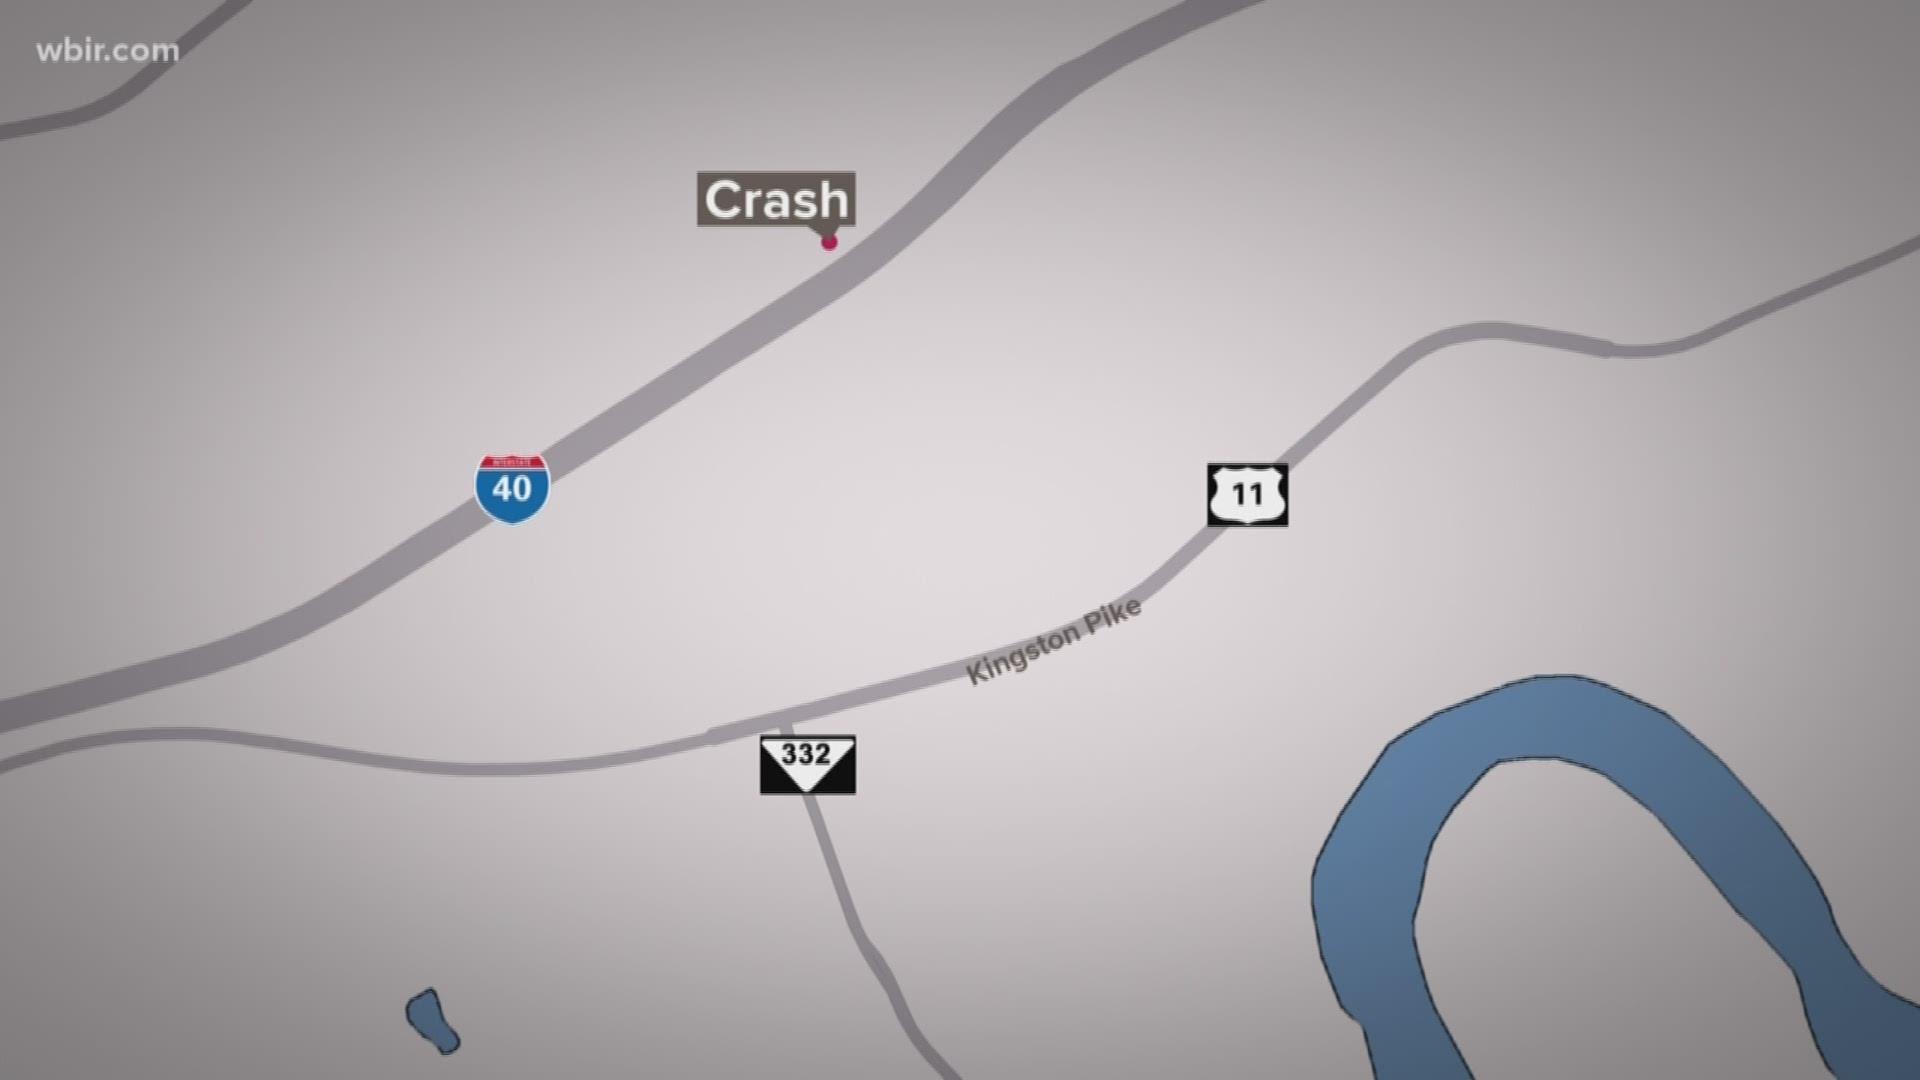 Knoxville Police officers responded to a call for a crash at approximately 2:12 a.m. When they got there, officers learned that after the crash happened, the driver and a good Samaritan exited their vehicles and were struck by a vehicle traveling east on I-40.